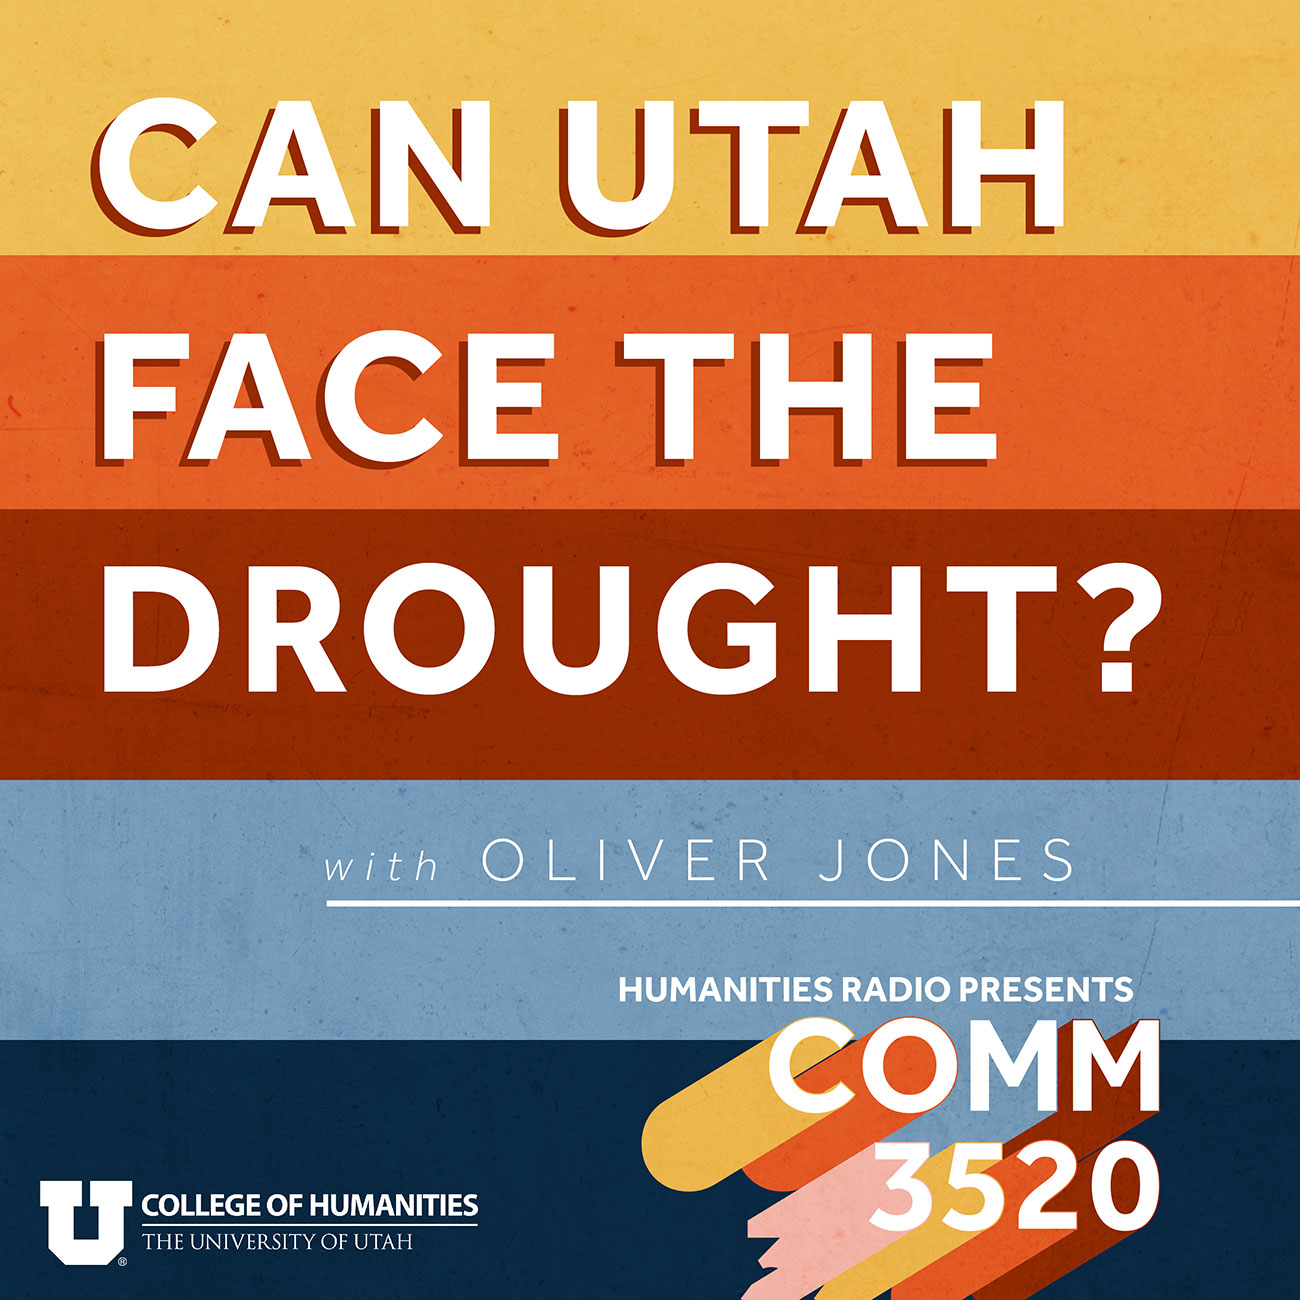 Can Utah Face The Drought?